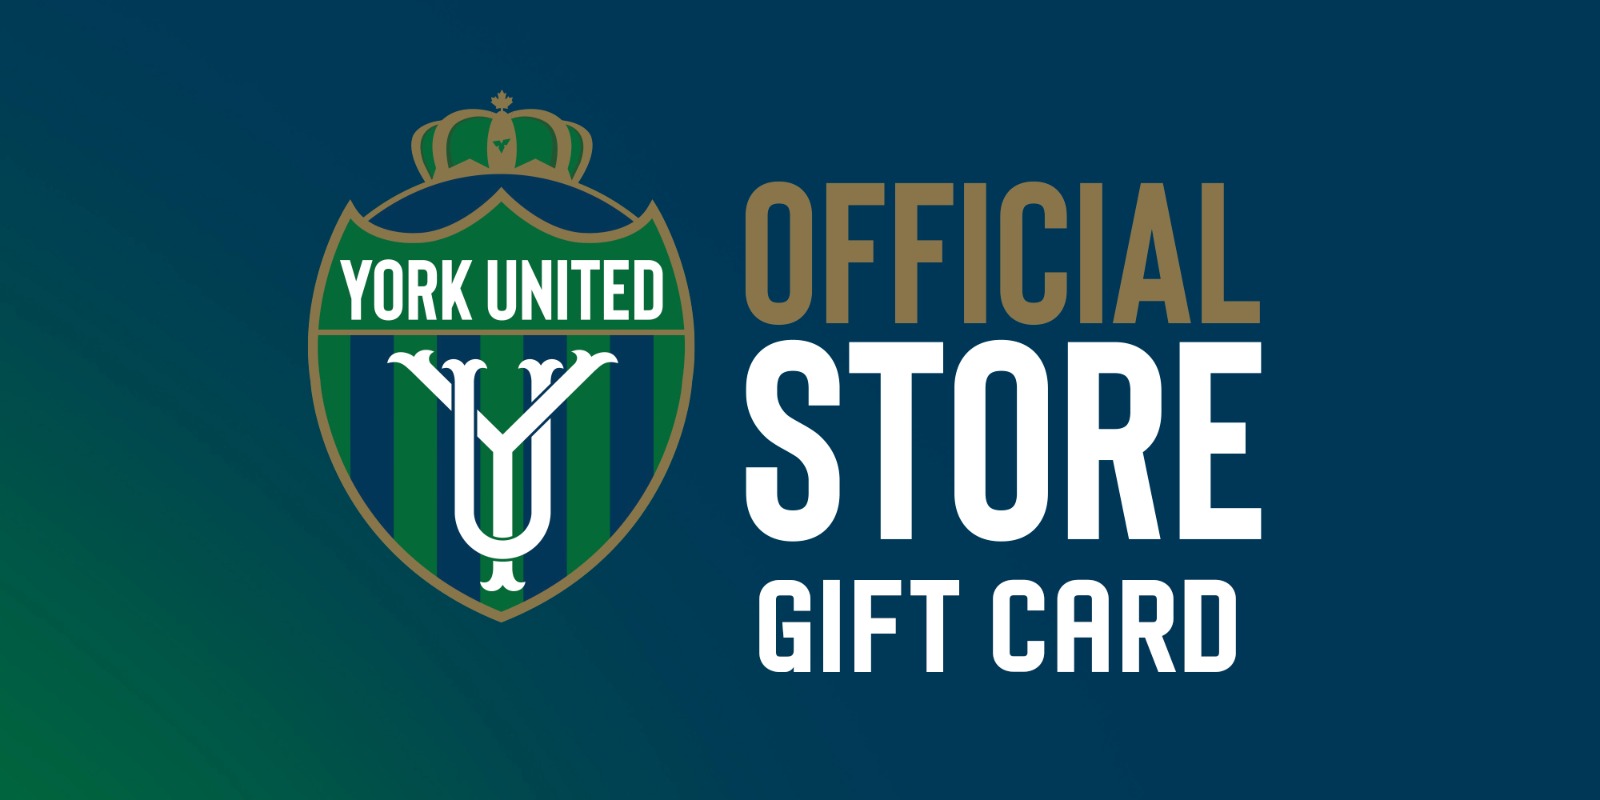 York United Official Store Gift Card